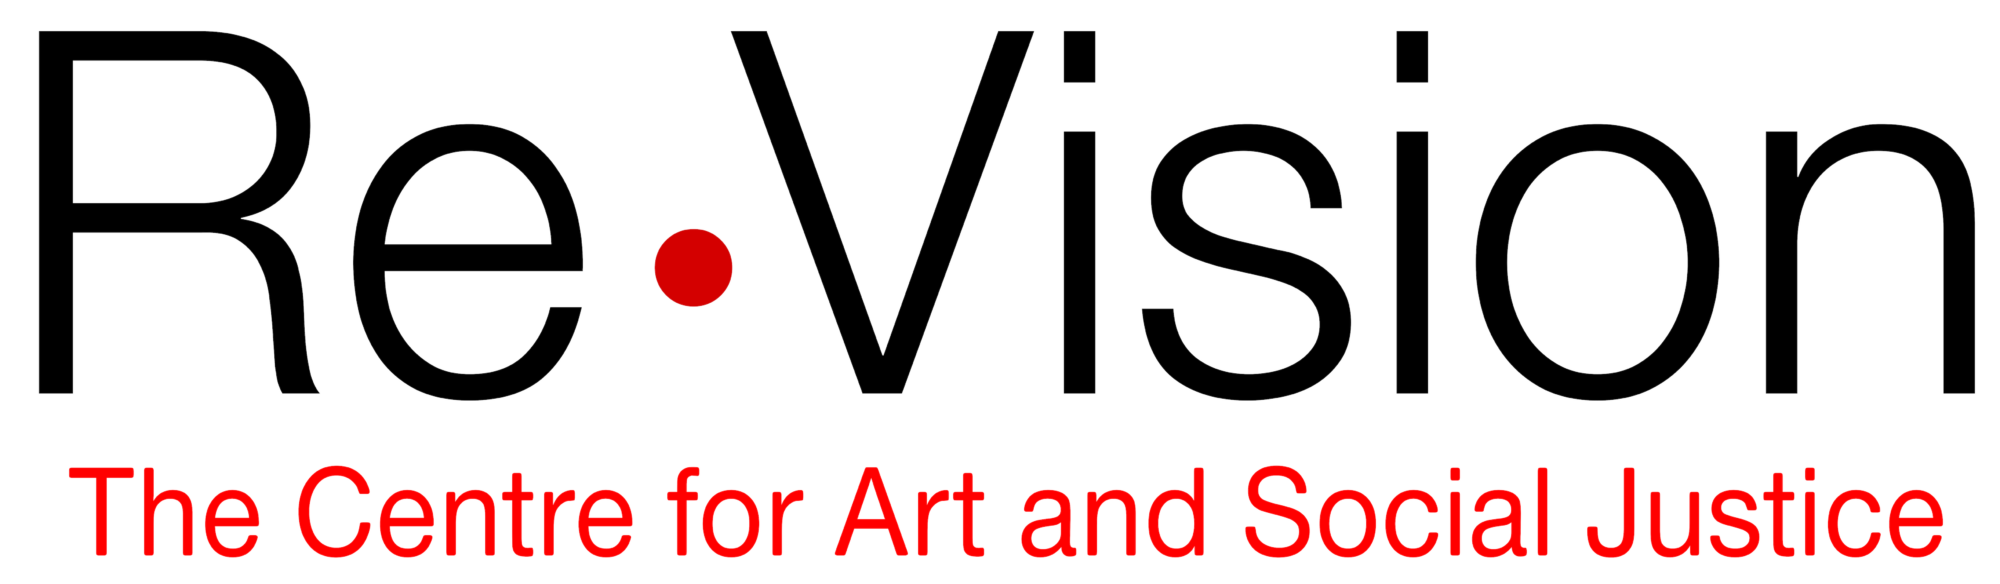 ReVision: The Centre for Art and Social Justice logo.